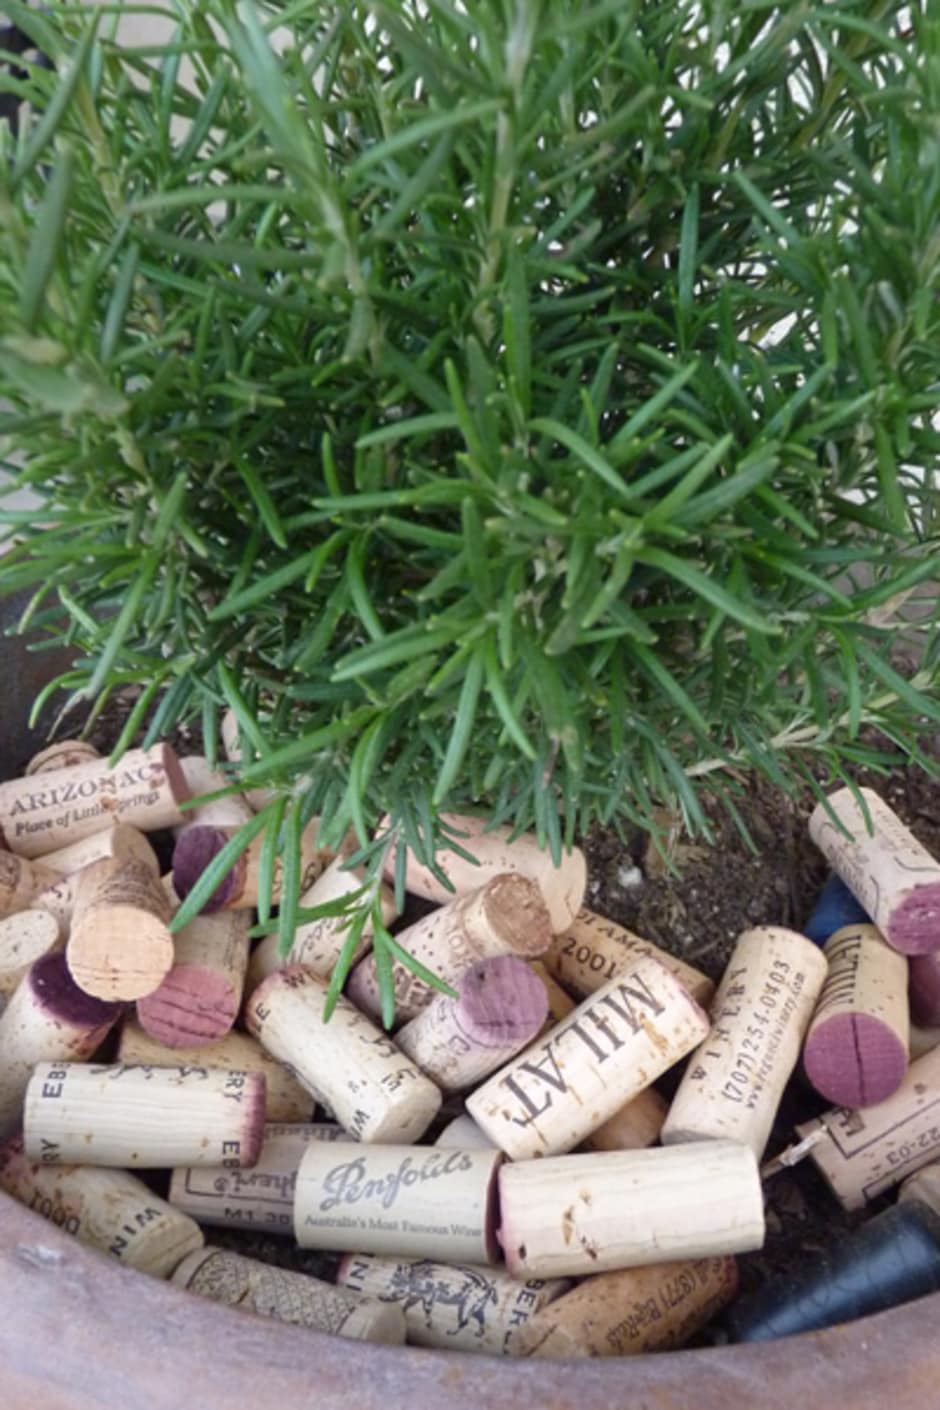 Great Ways to Use Recycled Wine Corks in the Garden - Bless My Weeds| Wine Corks, Wine Cork Crafts, Garden, Gardening Hacks, How to Reuse Recyled Wine Corks, Wine Cork Crafts for the Garden, Gardening Tips, Repurpose Projects #GardeningTips #WineCorkCrafts #RepurposeProjects